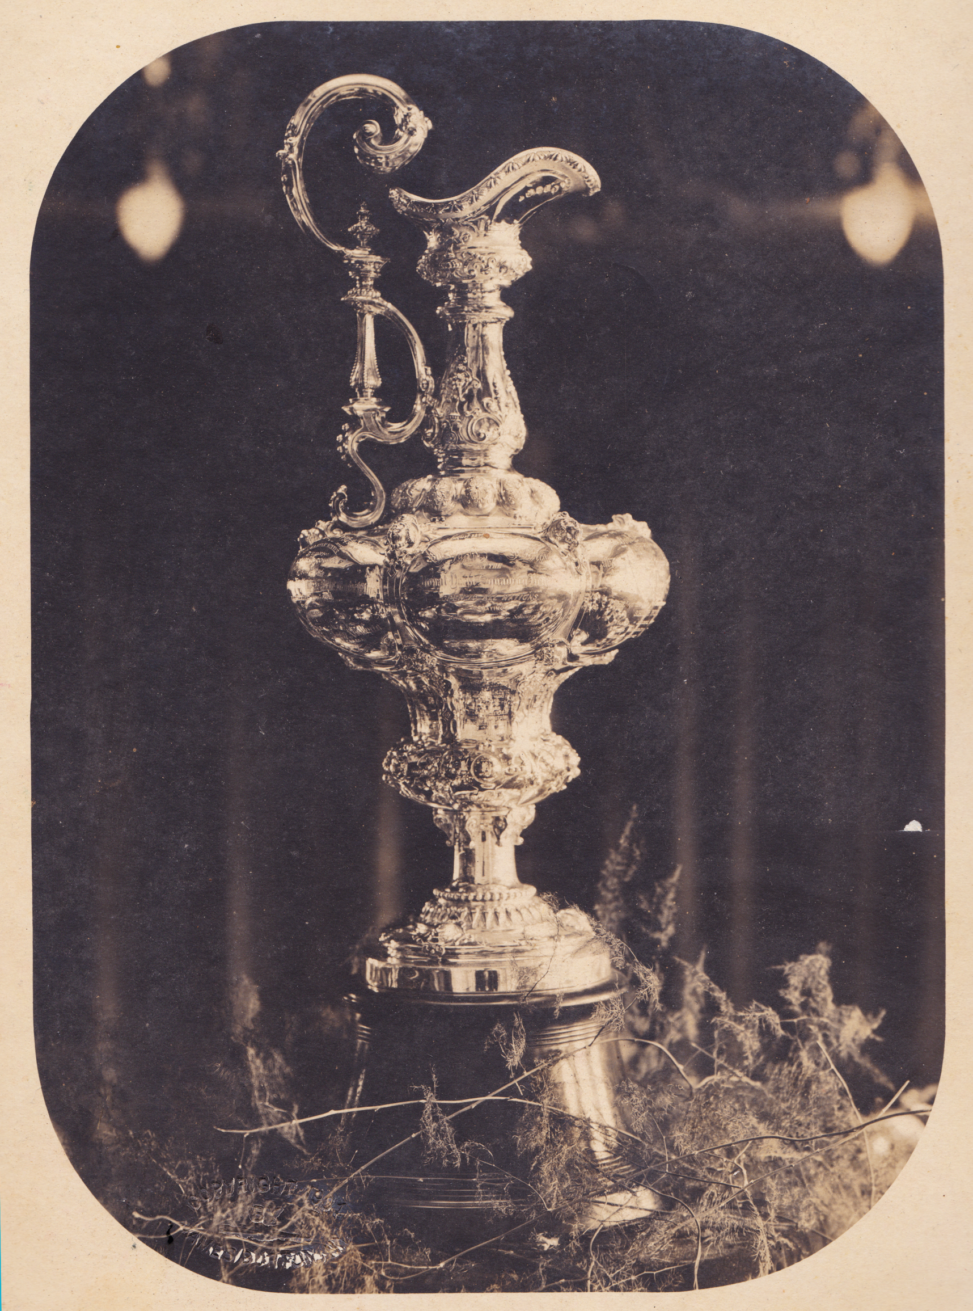 The America’s Cup Copyright 1901 by James Burton